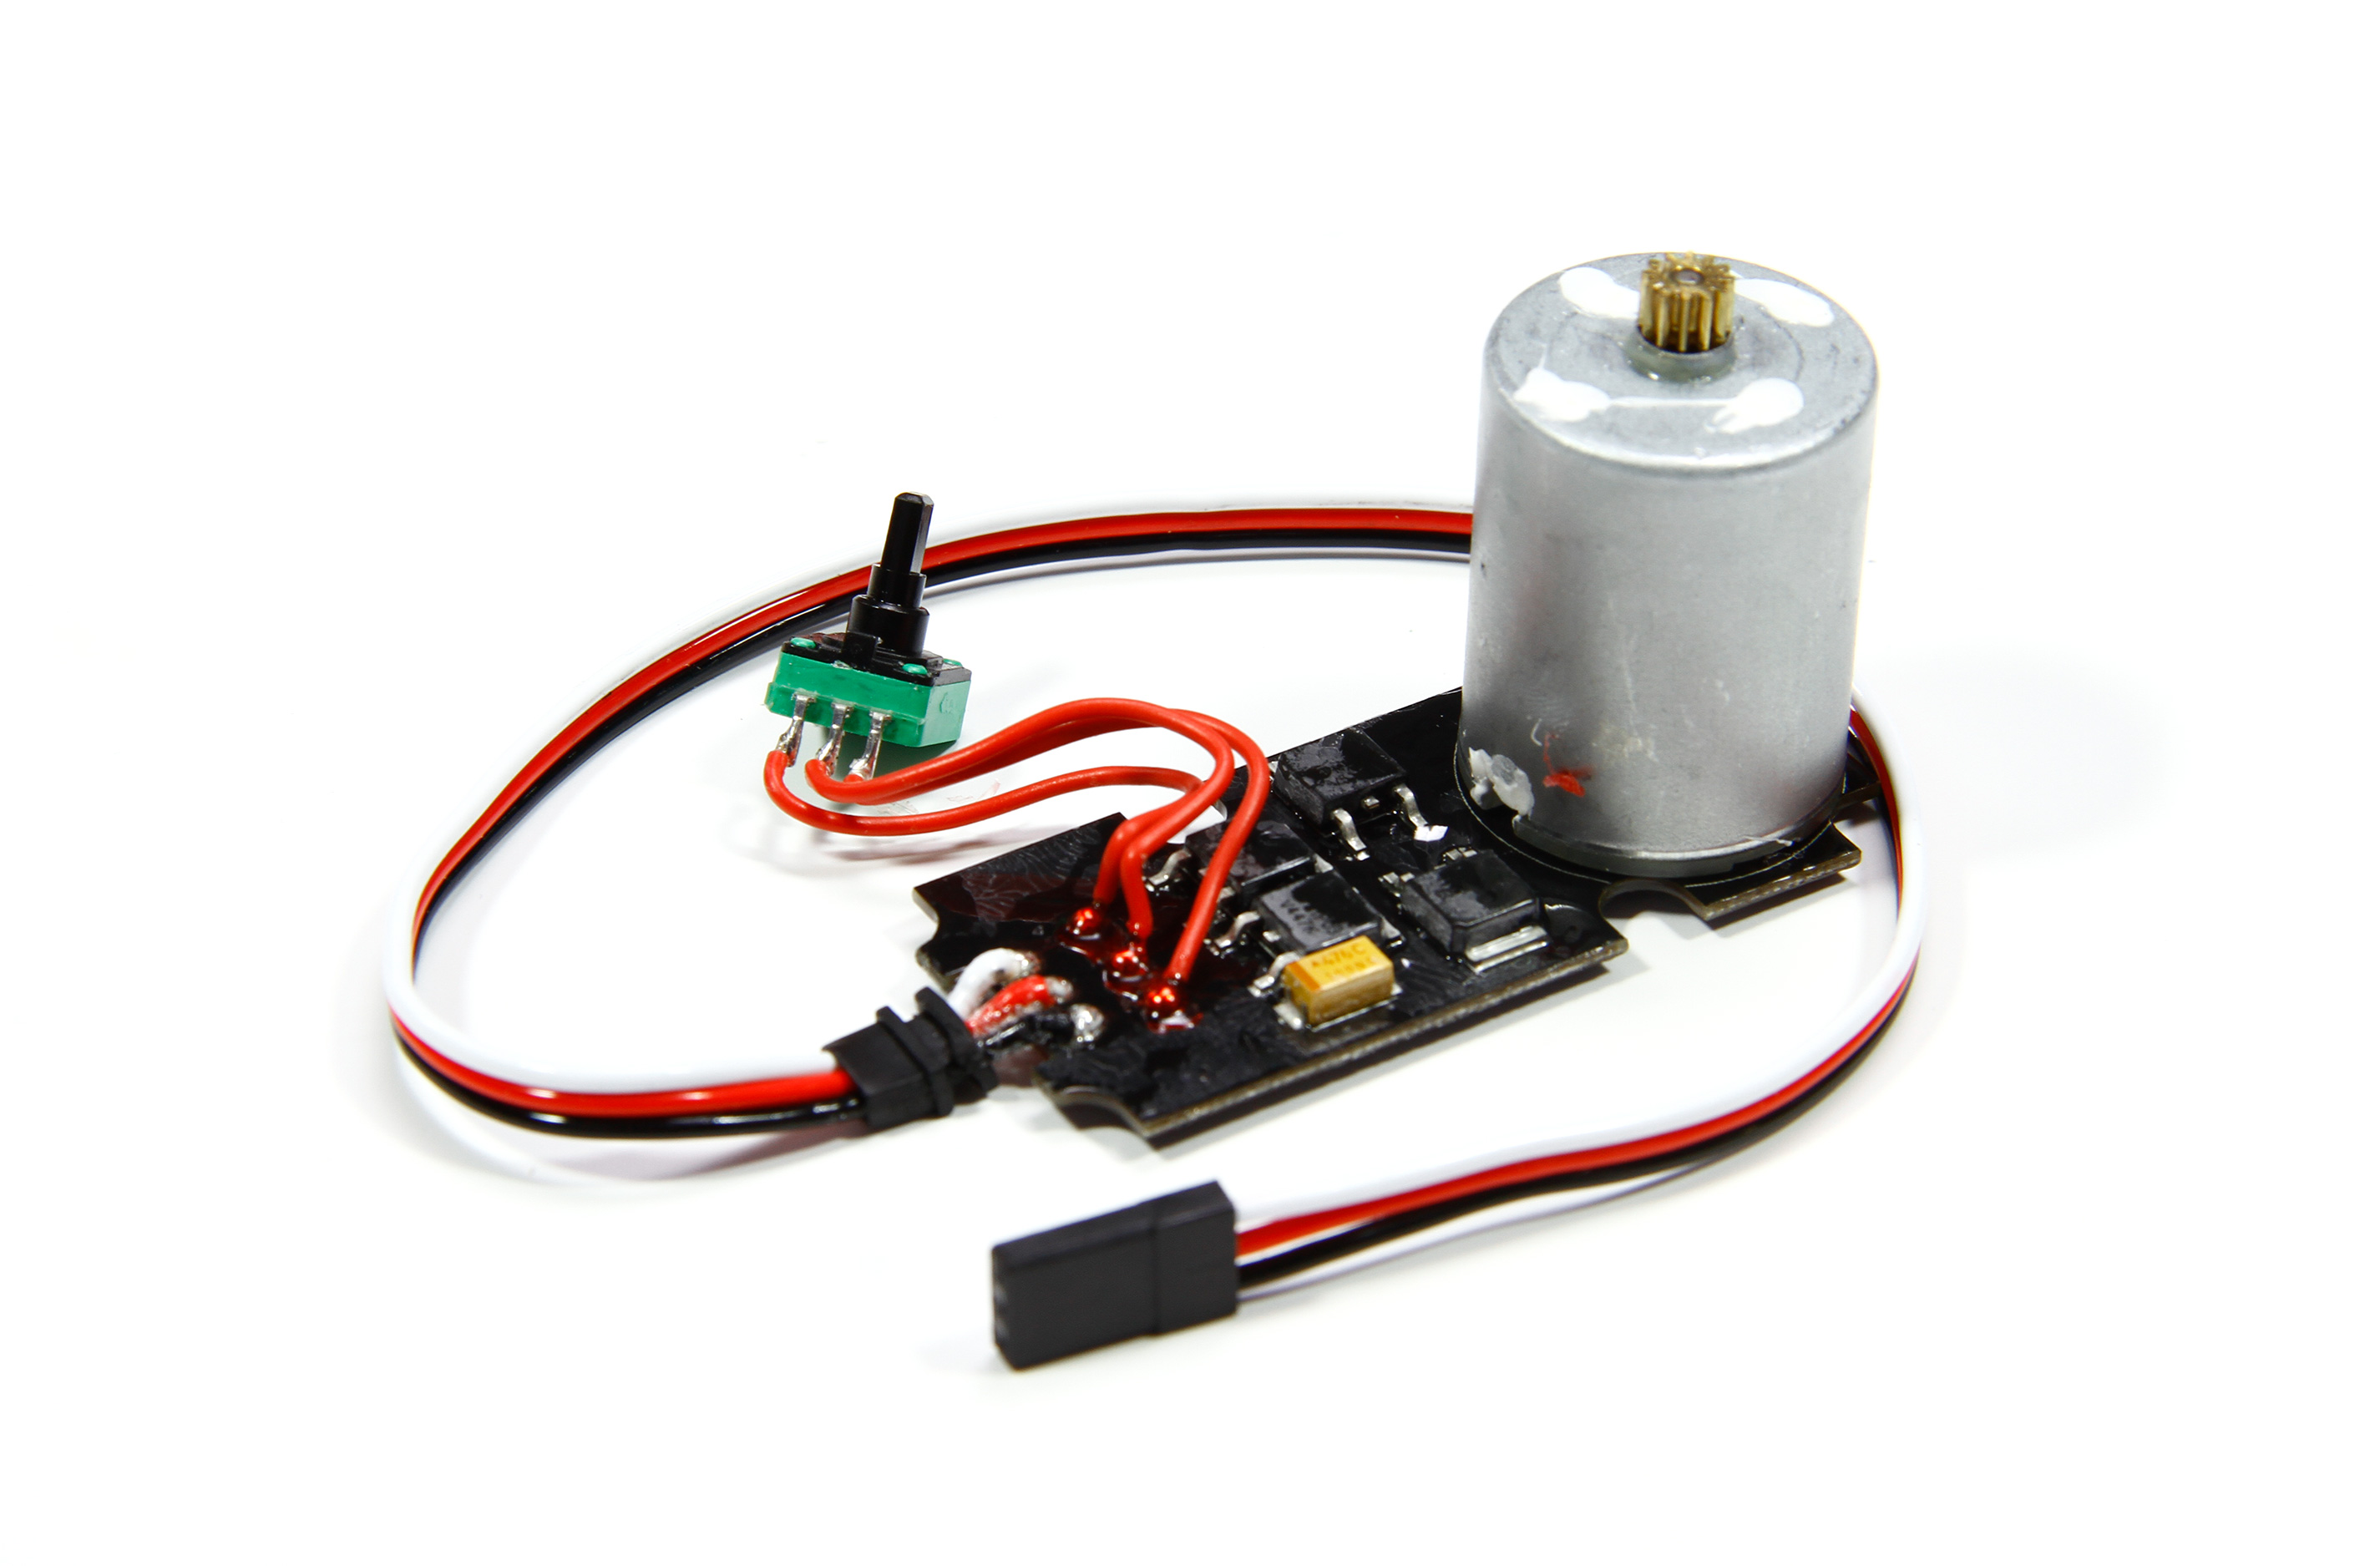 DM4000/05 Servo motor and electronics, with cable for K-Power